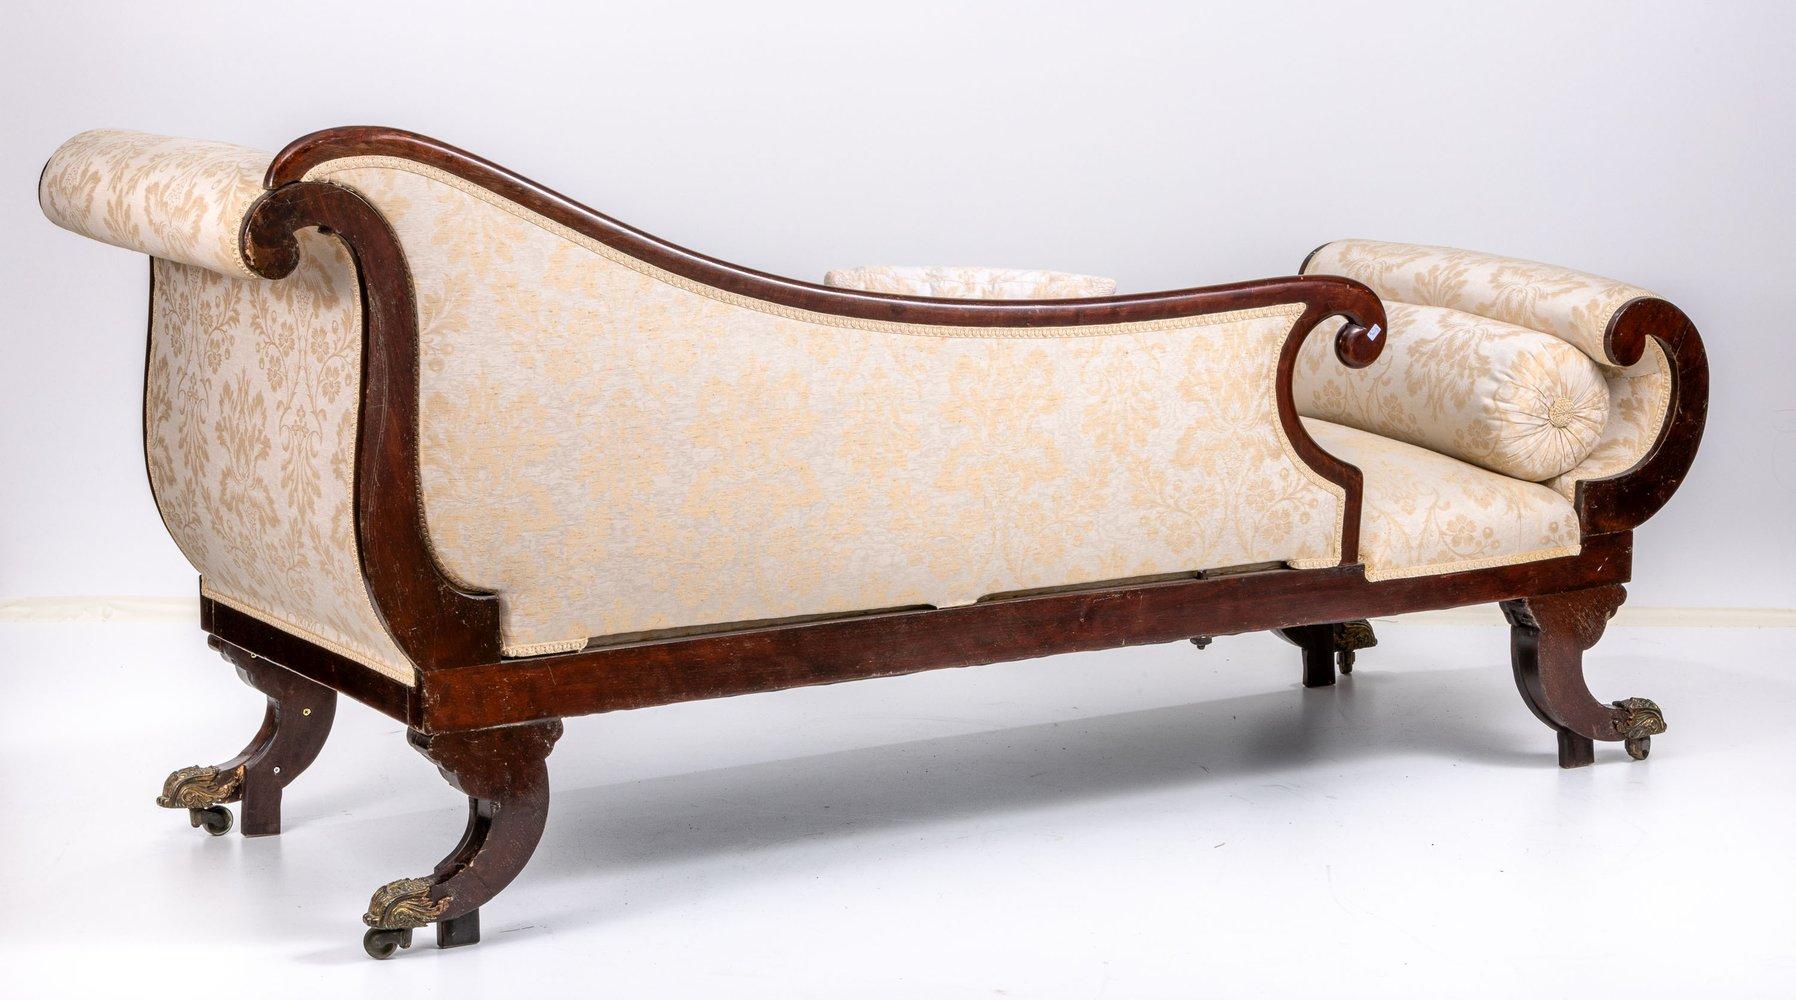 Antique English Chaise Longue/ Recamiere, Mahogany, arround 1830

Mahogany with Boulle decor. Tub shape, upholstered. Curved backrest tapering to one side with volute end. Godroned and voluted saber legs with brass shoes and castors. Two pillow